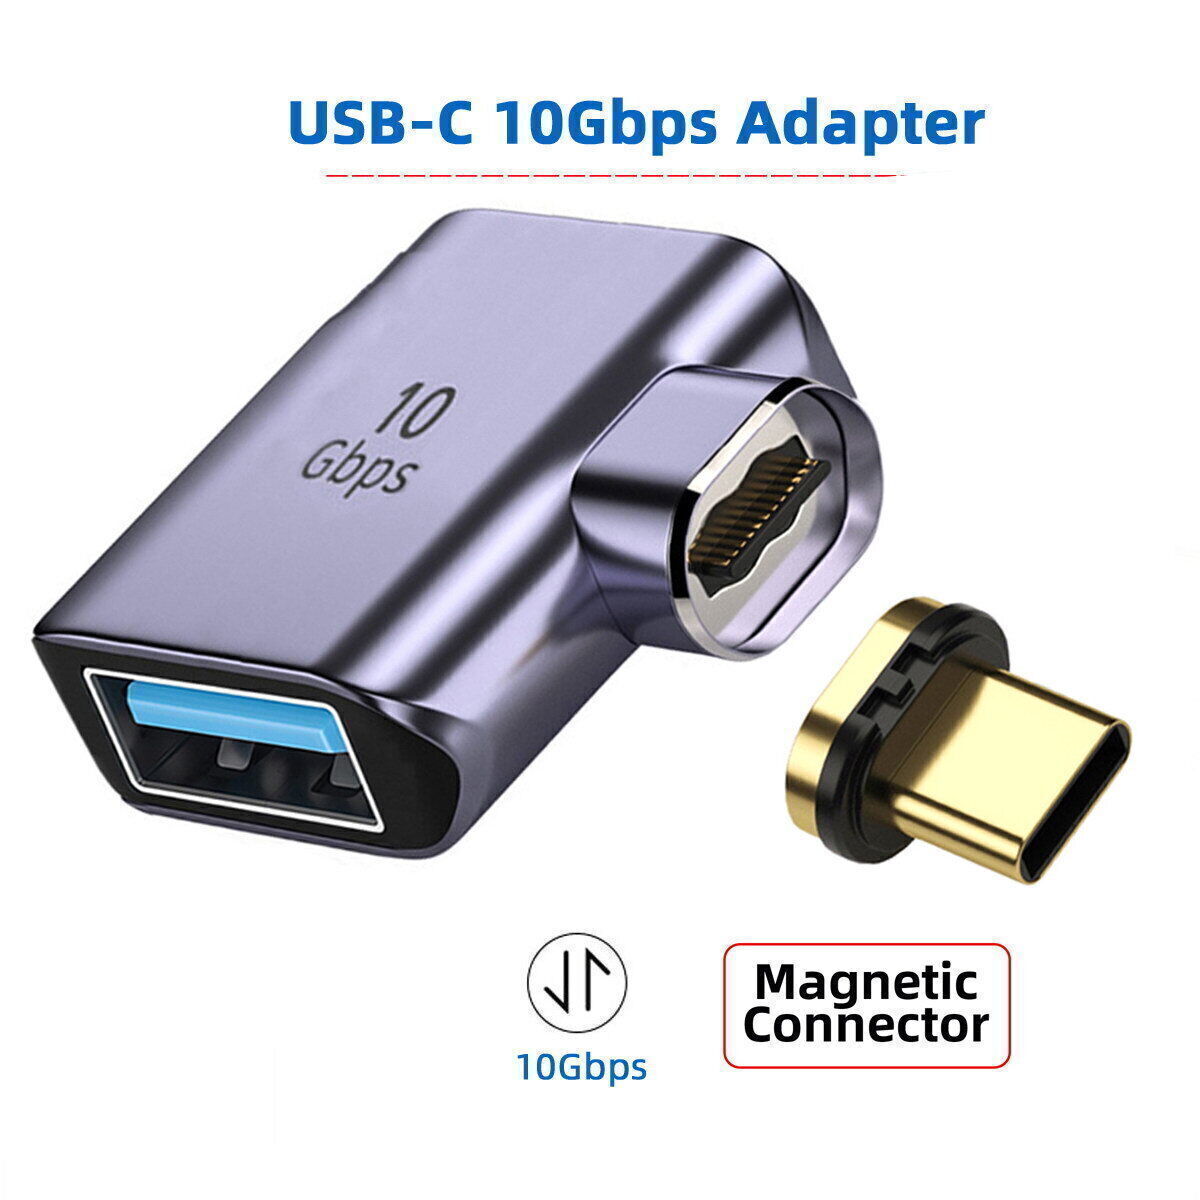 CY OTG USB C Magnetic Connector Adapter,USB Type C to USB3.0 Type A Data Adapter